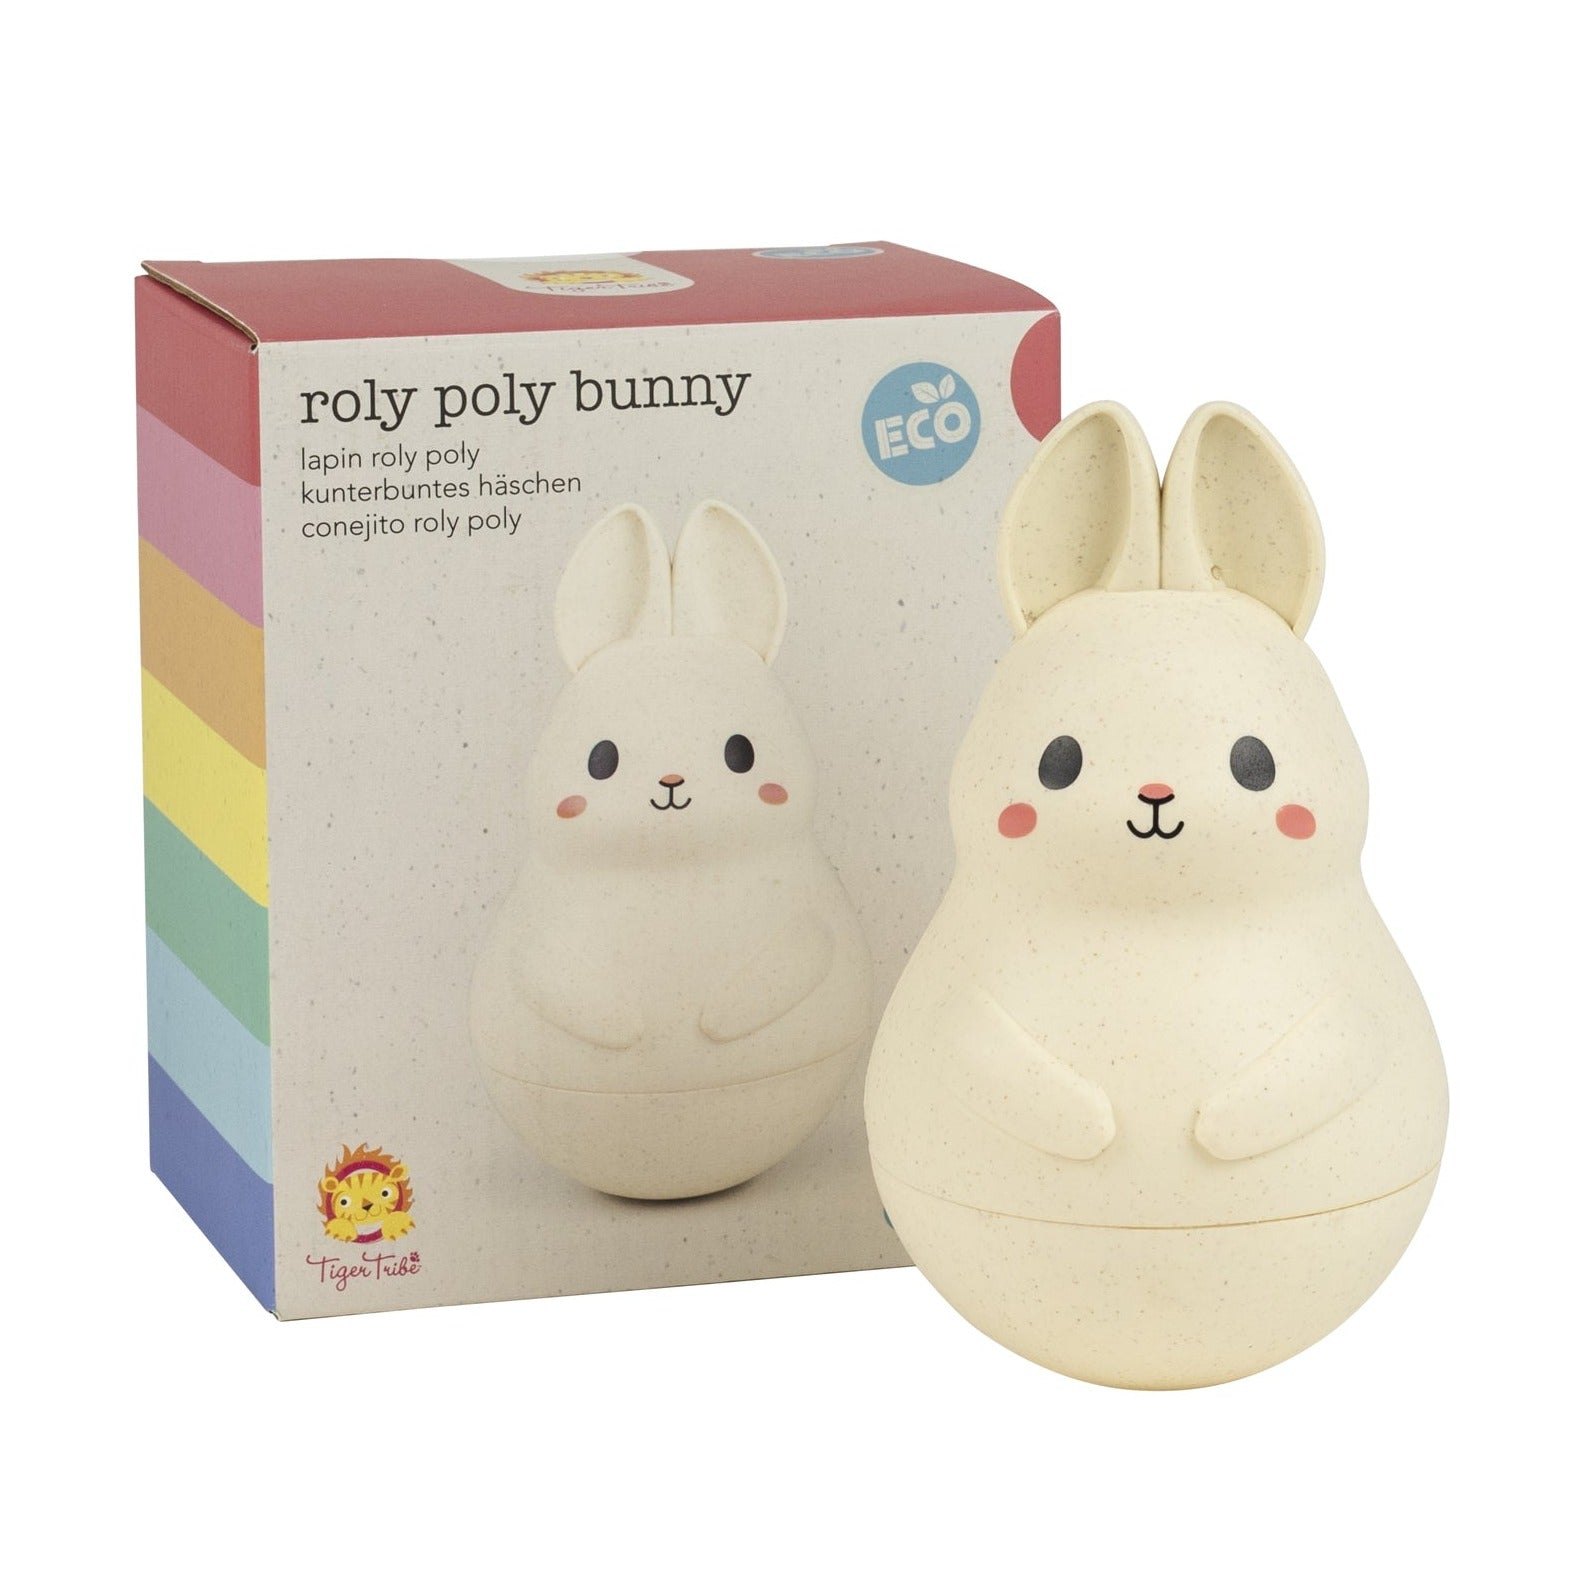 roly poly bunny - angus and dudley